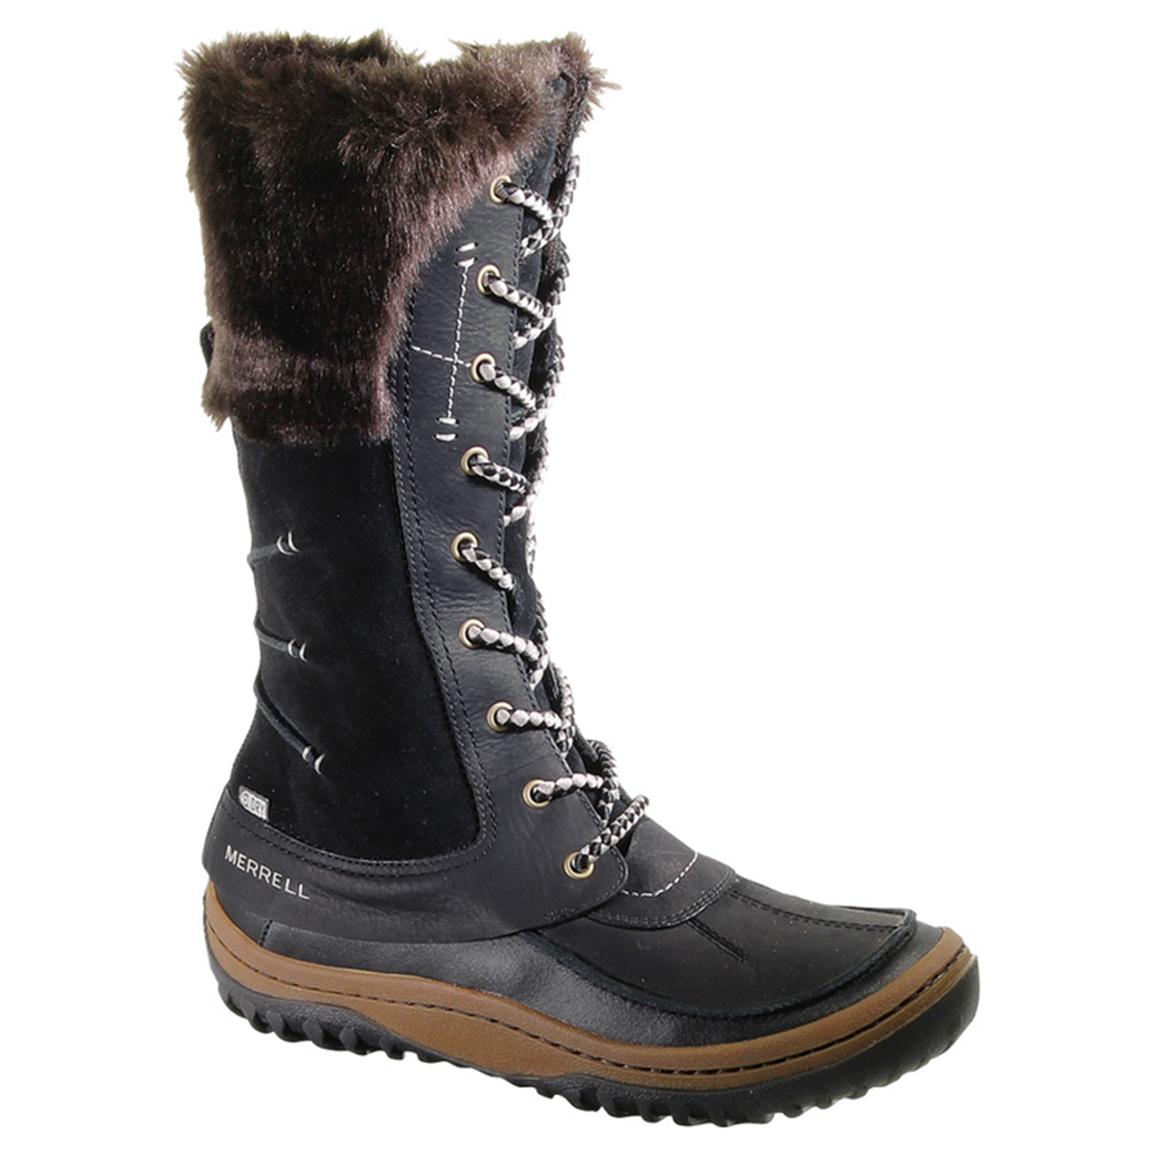 Waterproof Womens Boots Snow | FP Boots